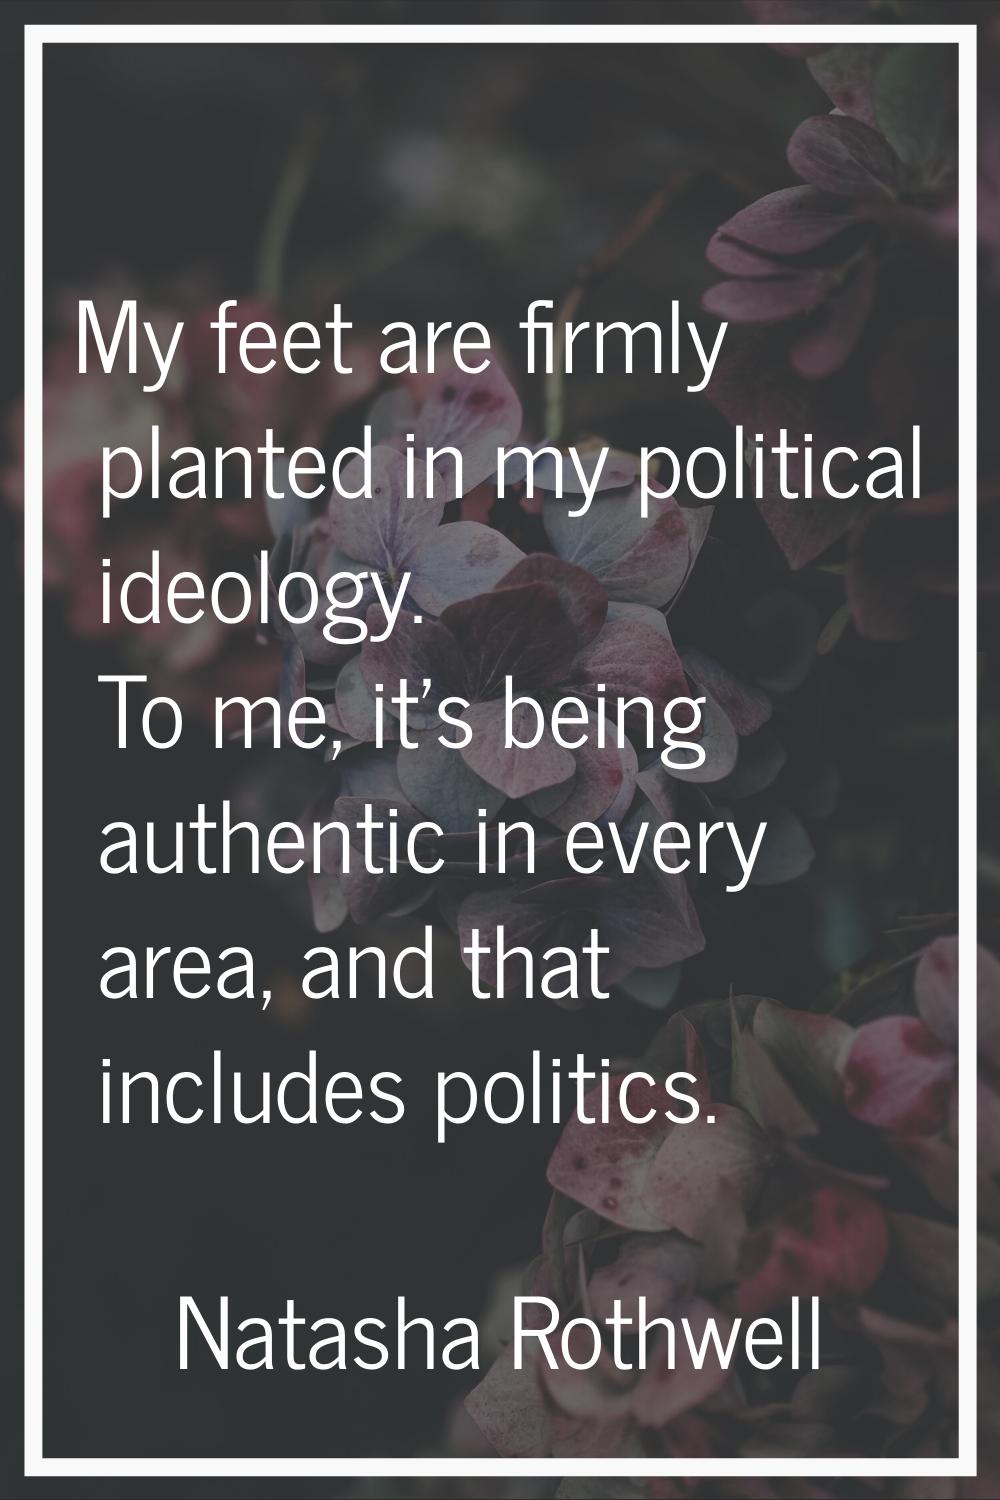 My feet are firmly planted in my political ideology. To me, it's being authentic in every area, and